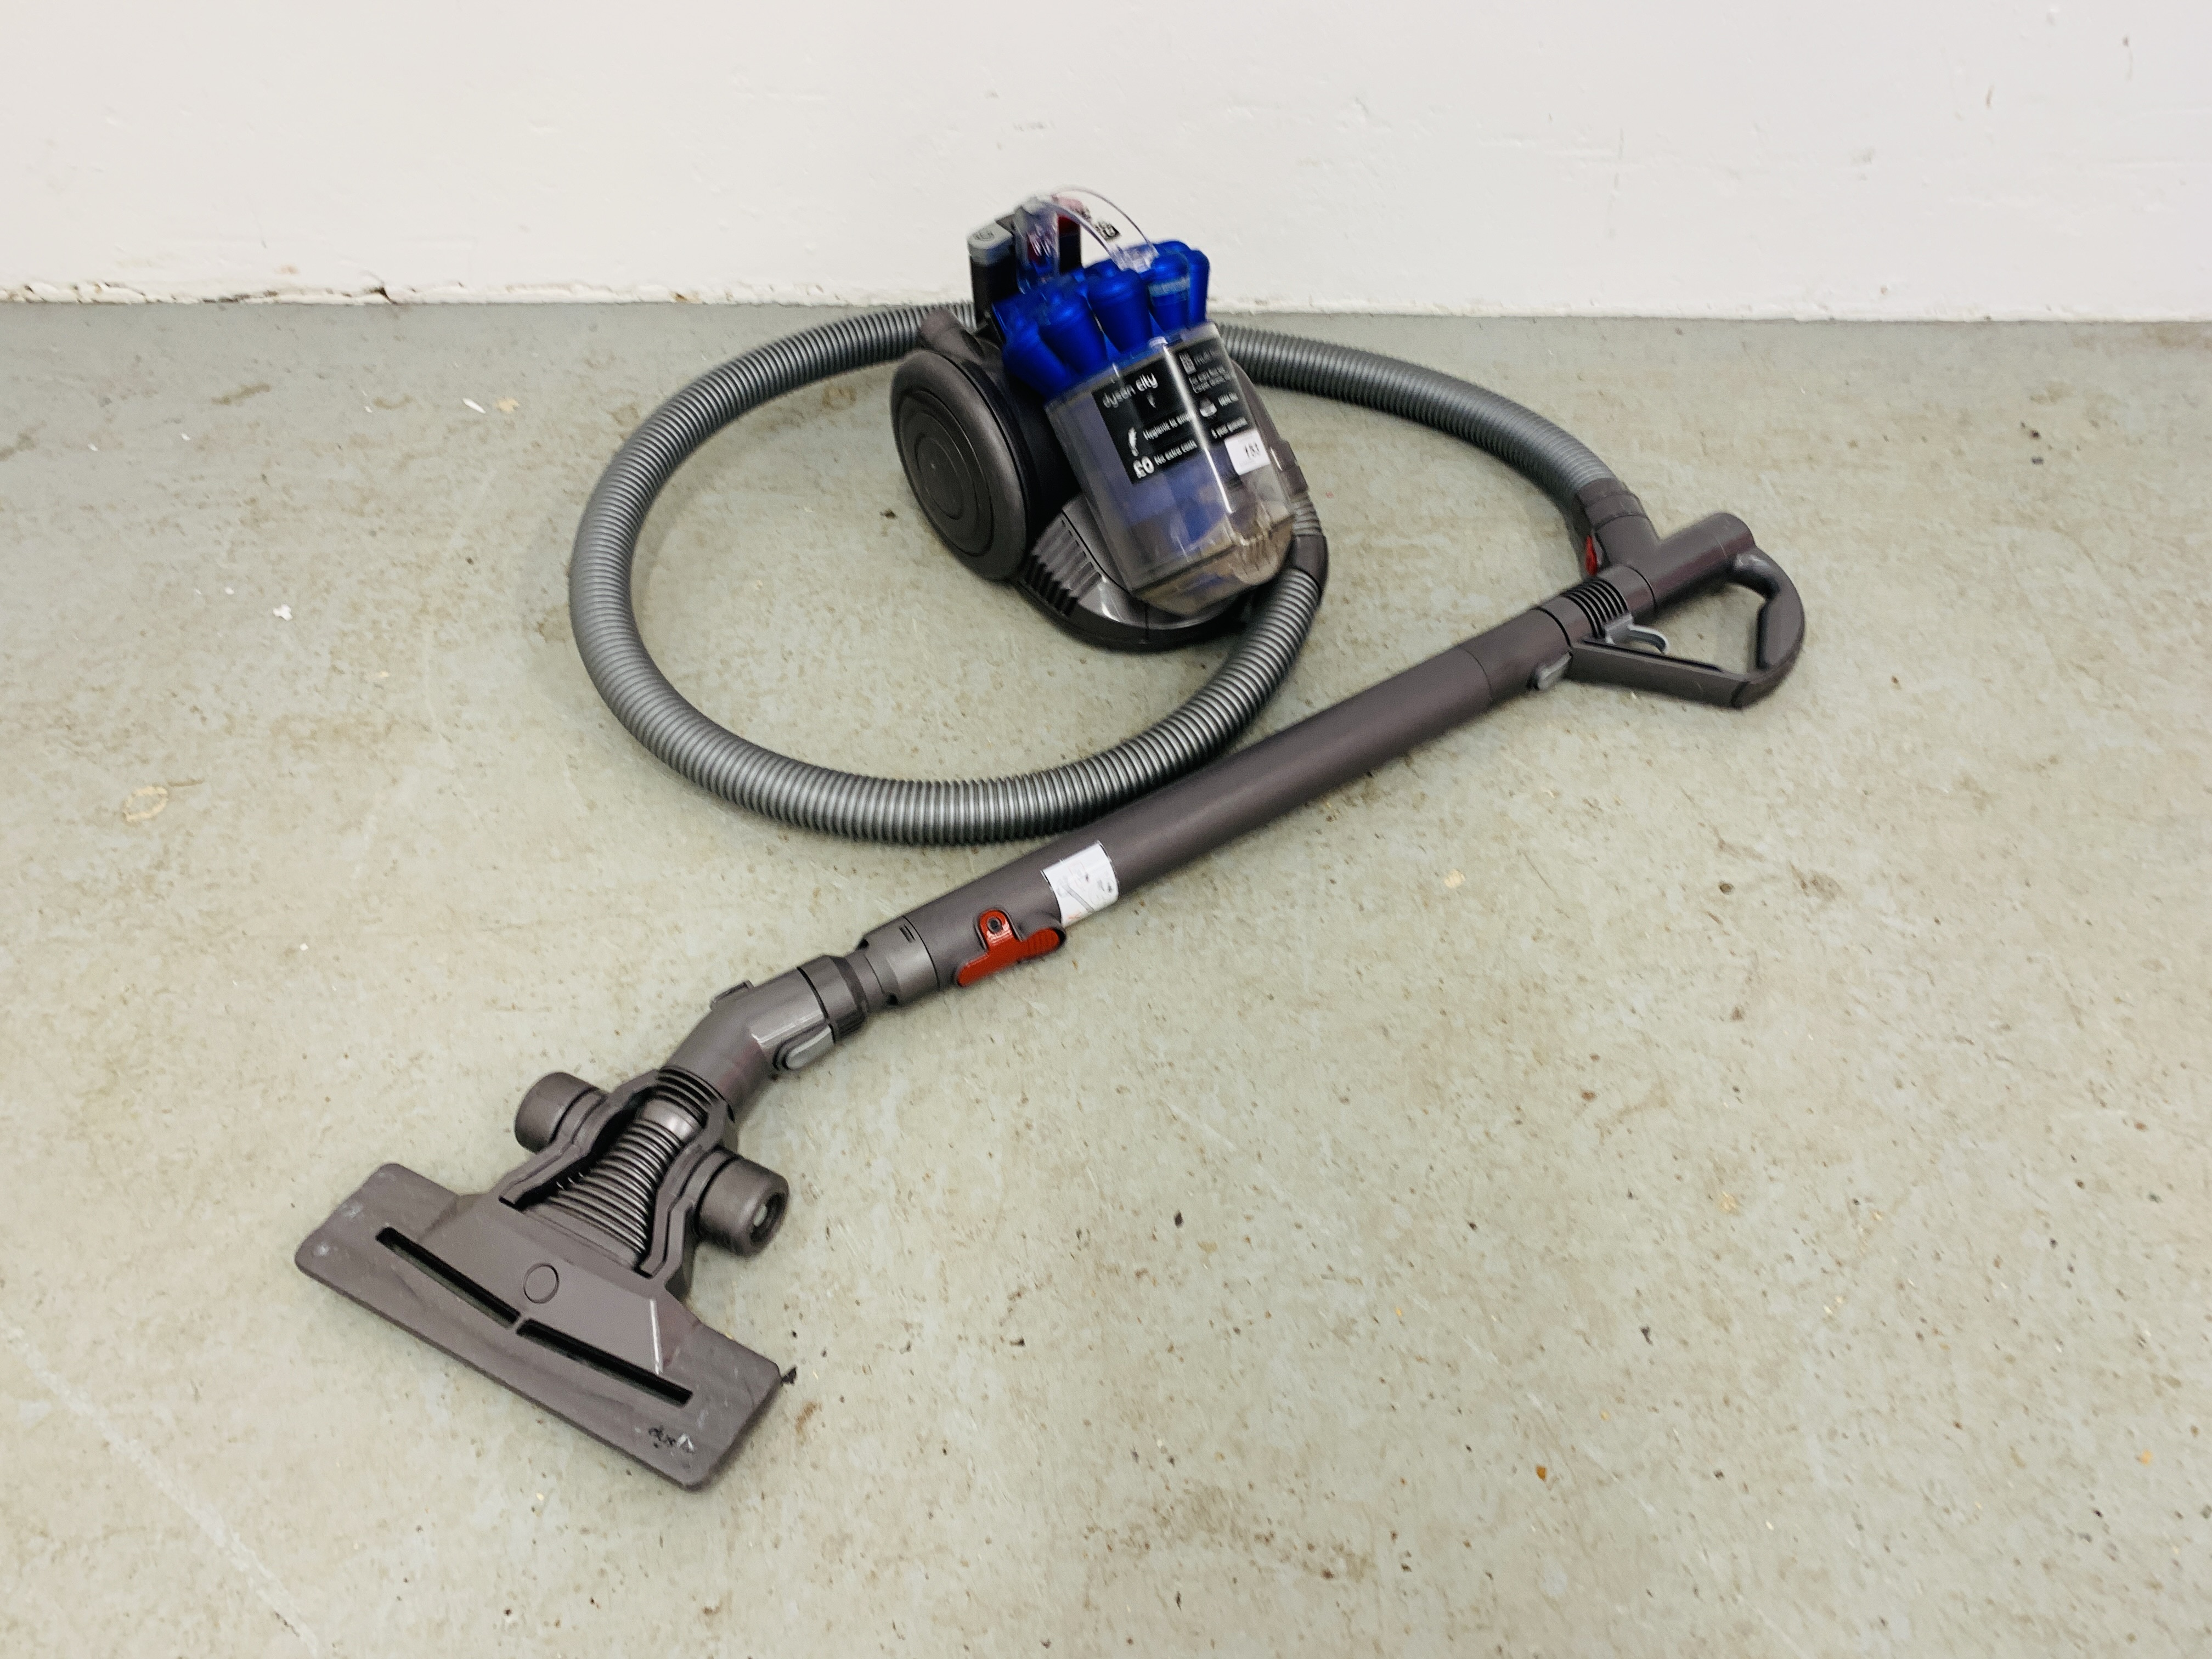 A DYSON DC26 COMPACT VACUUM CLEANER - SOLD AS SEEN.